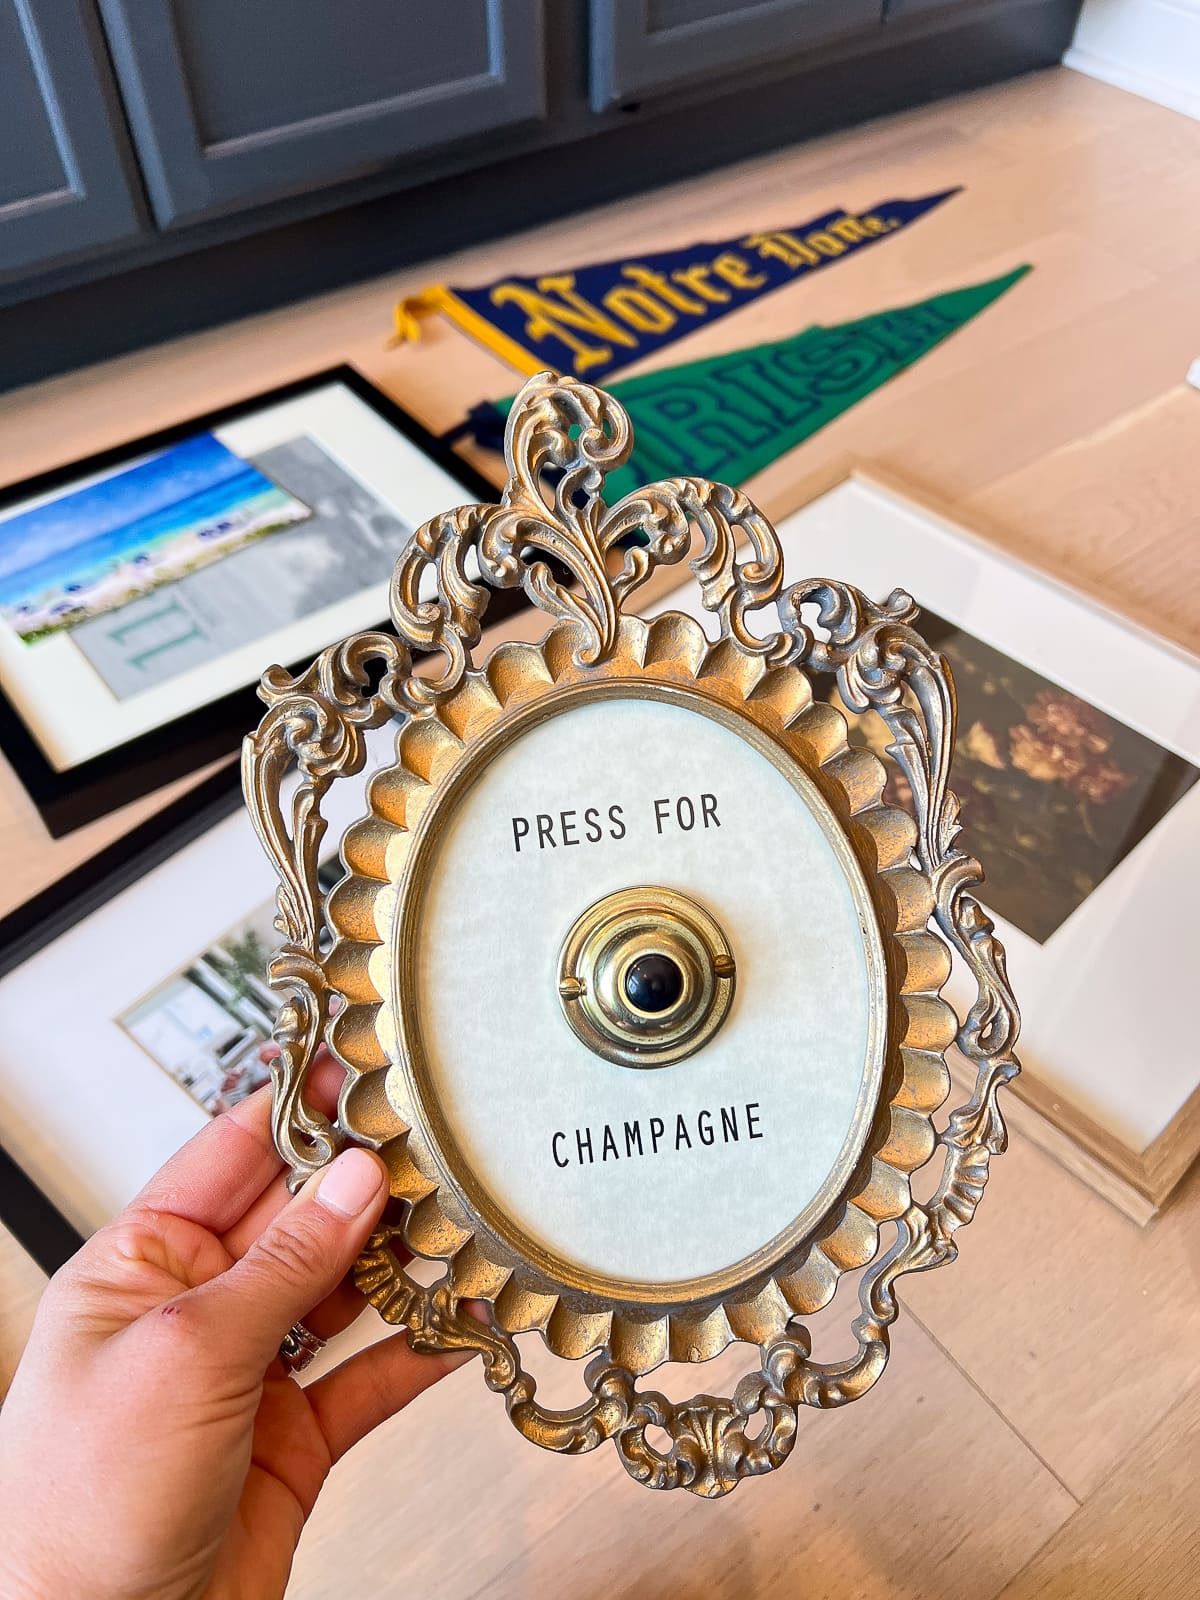 Press for champagne sign